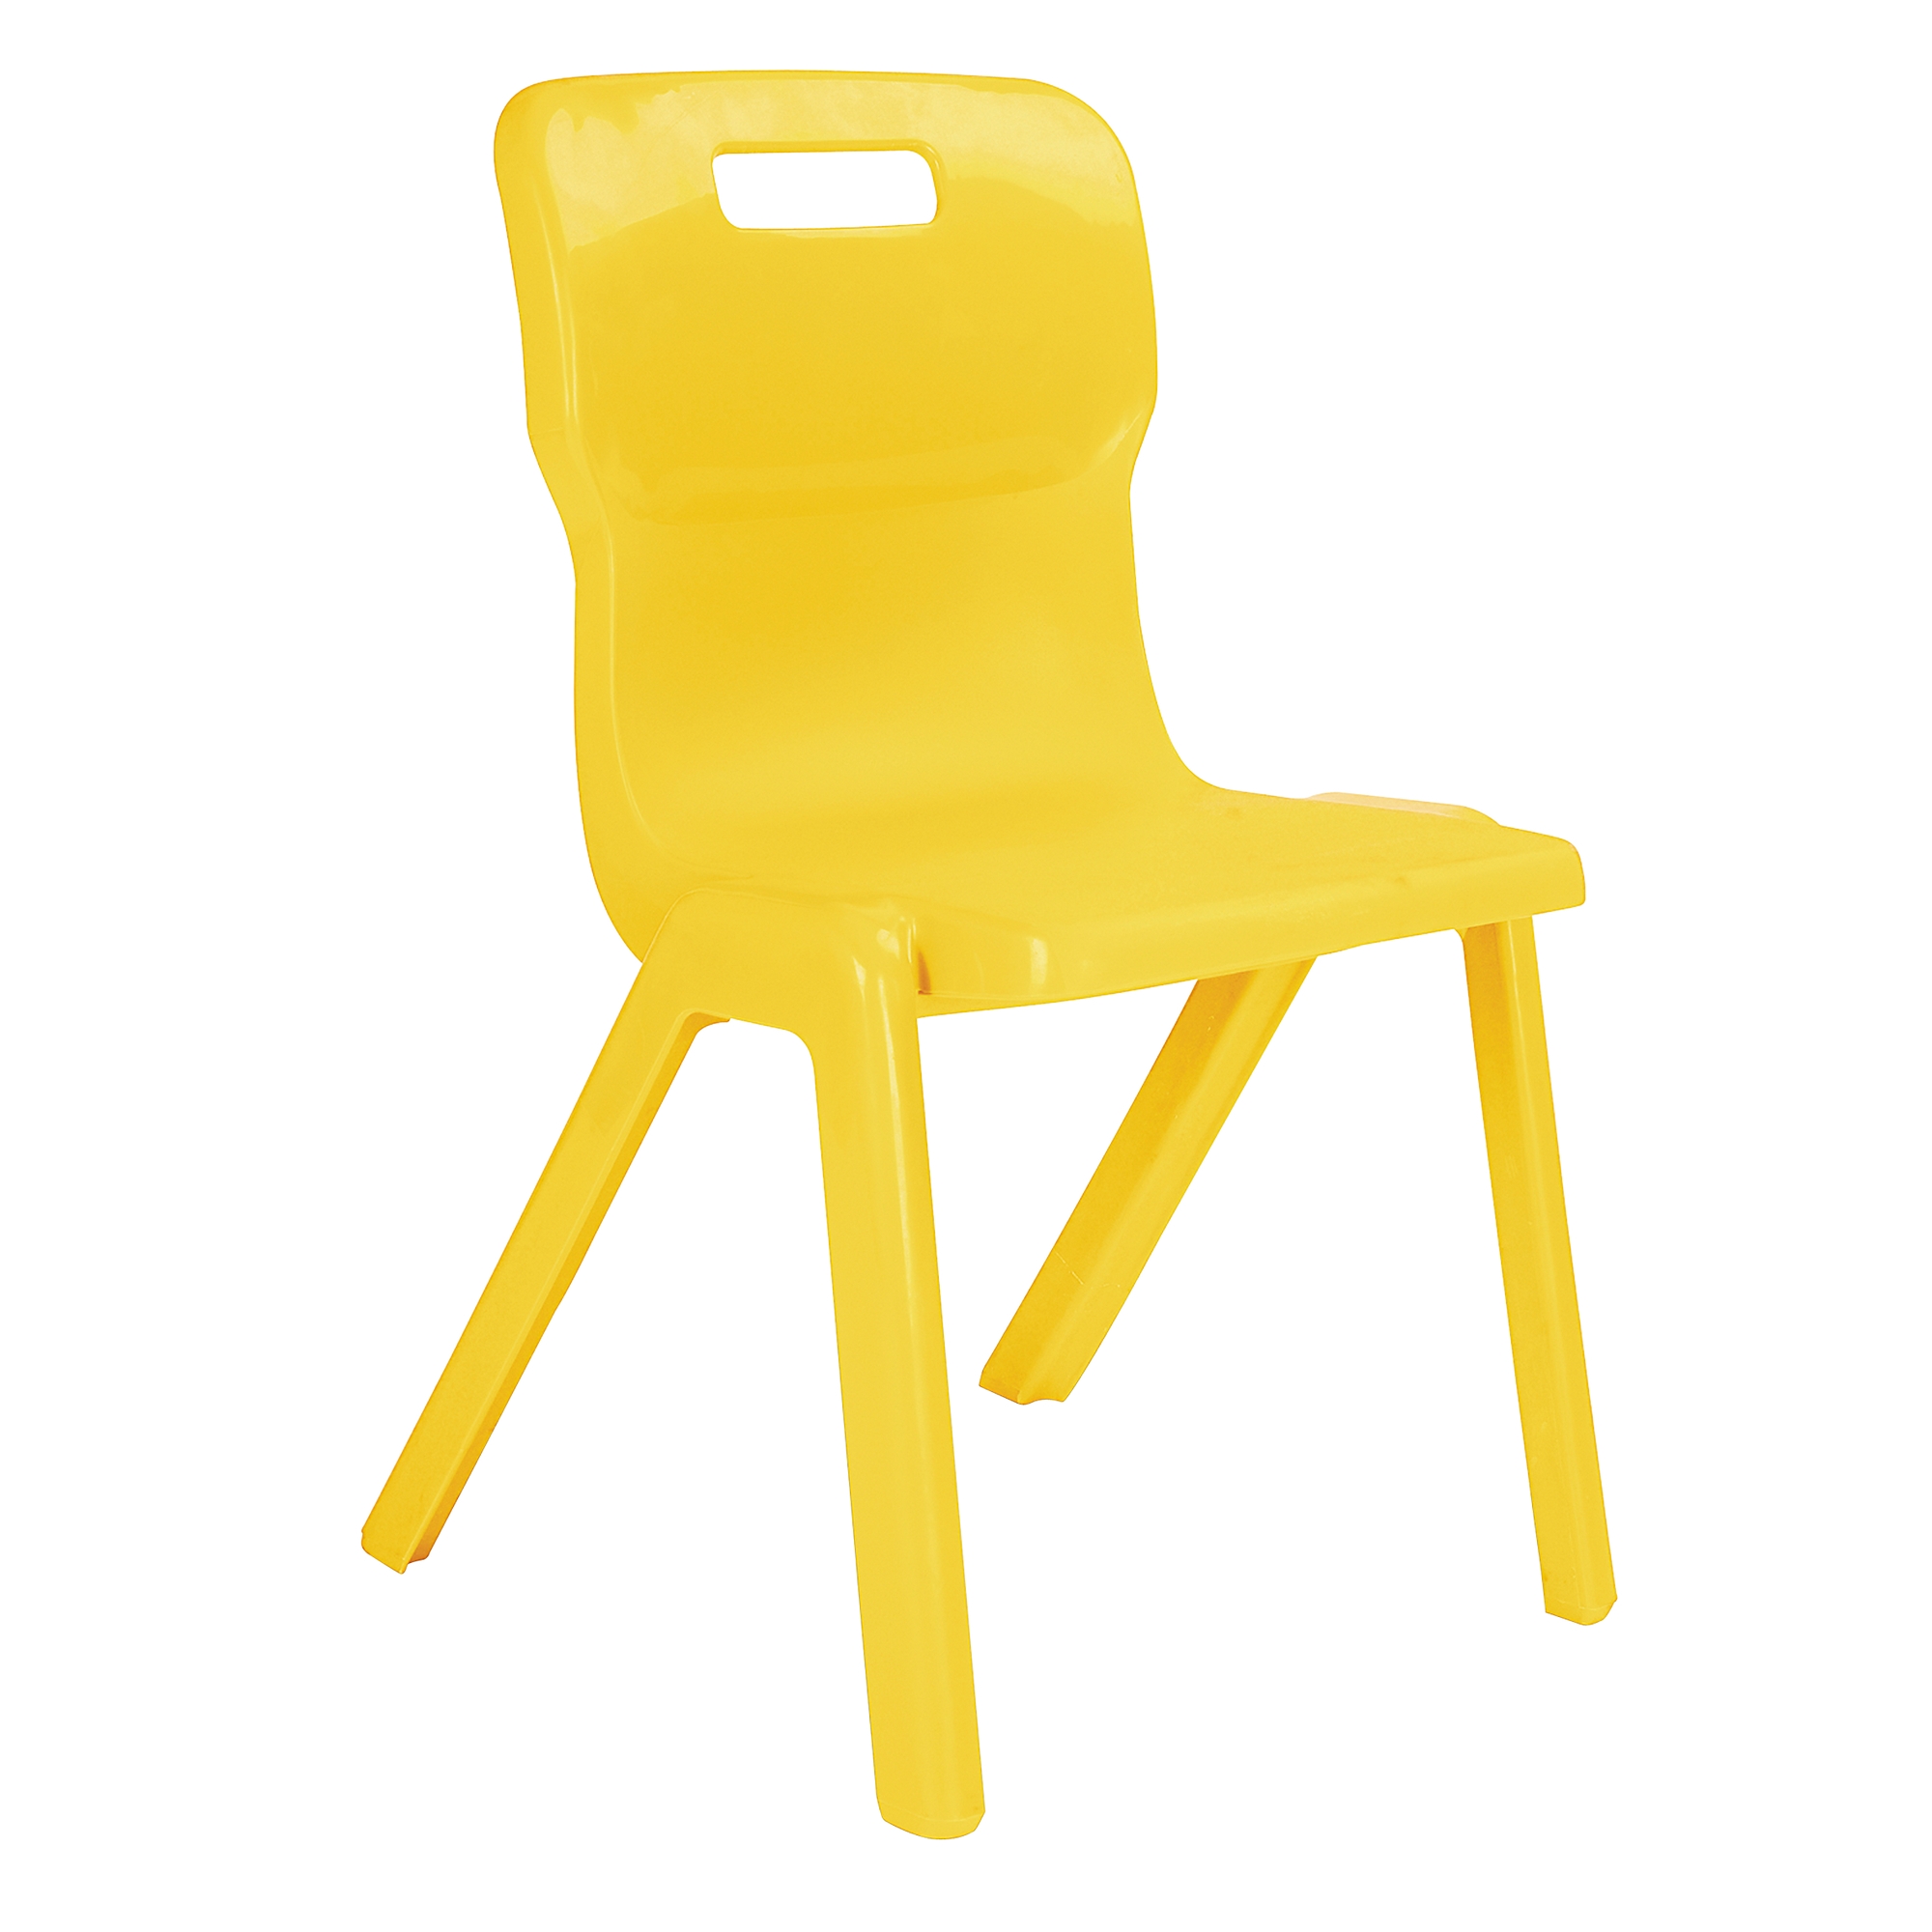 One Piece Titan Chair - Size 3 Ages 6-8 Yellow